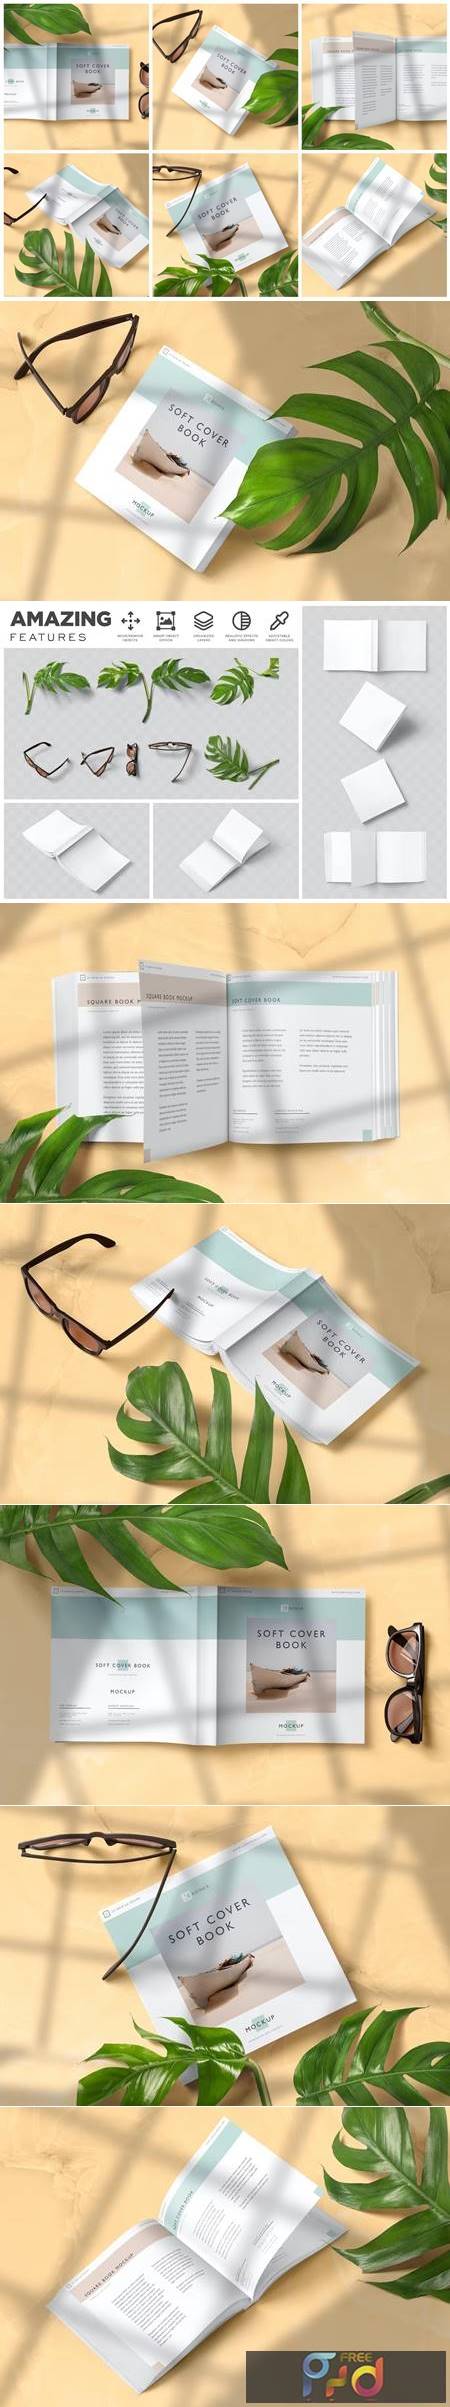 Square Shape Softcover Book Mockups A7SLWYR 1